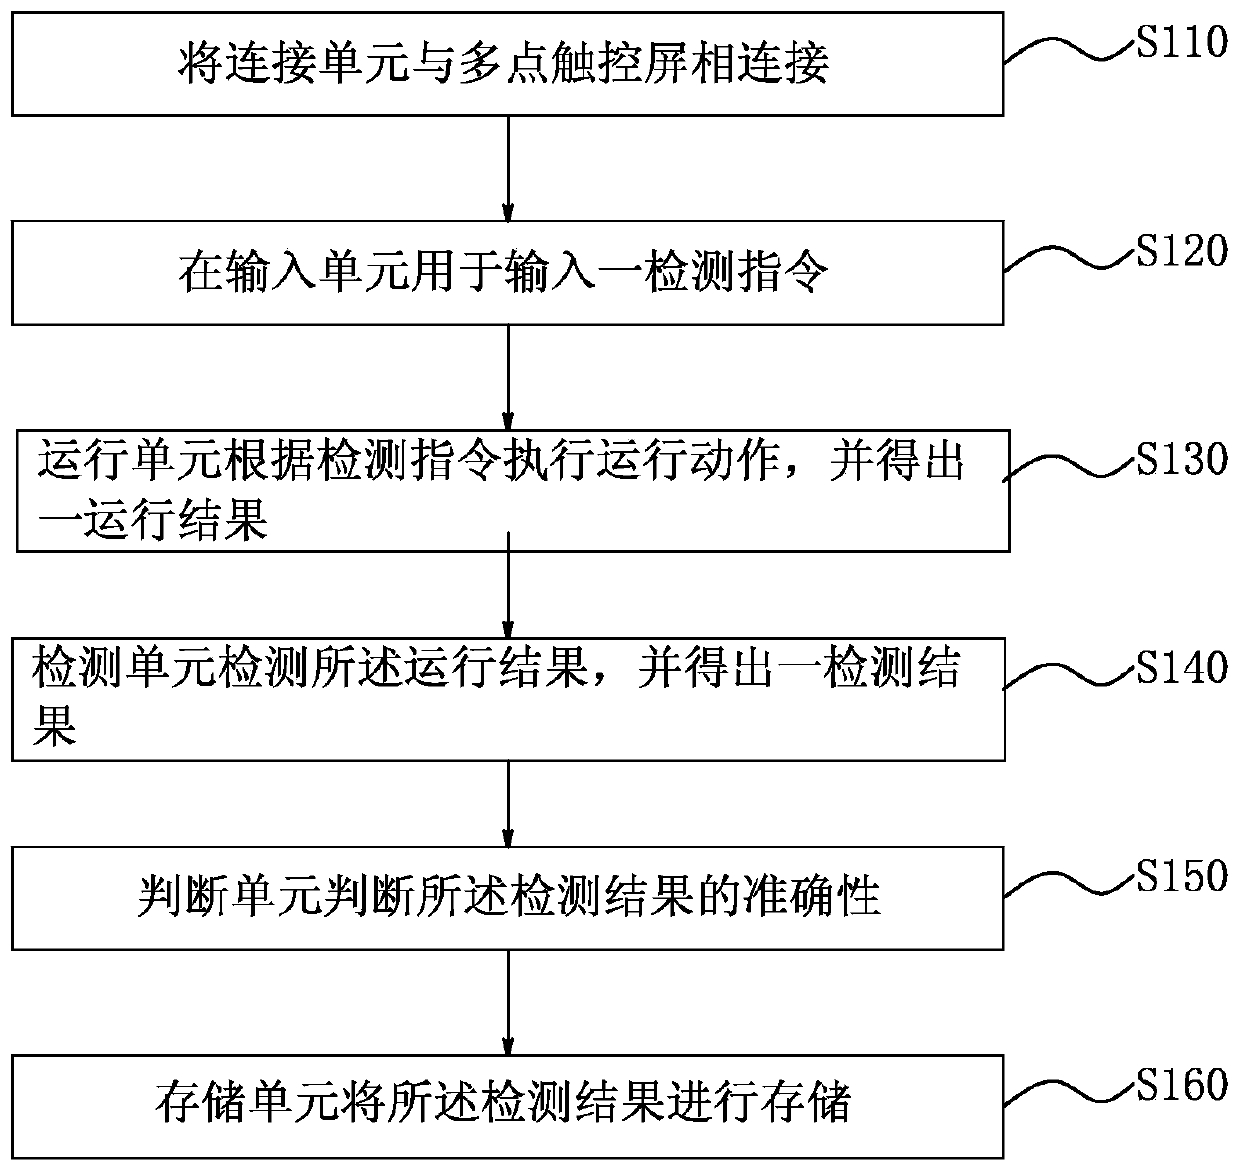 Multi-point touch screen detection system and detection method thereof